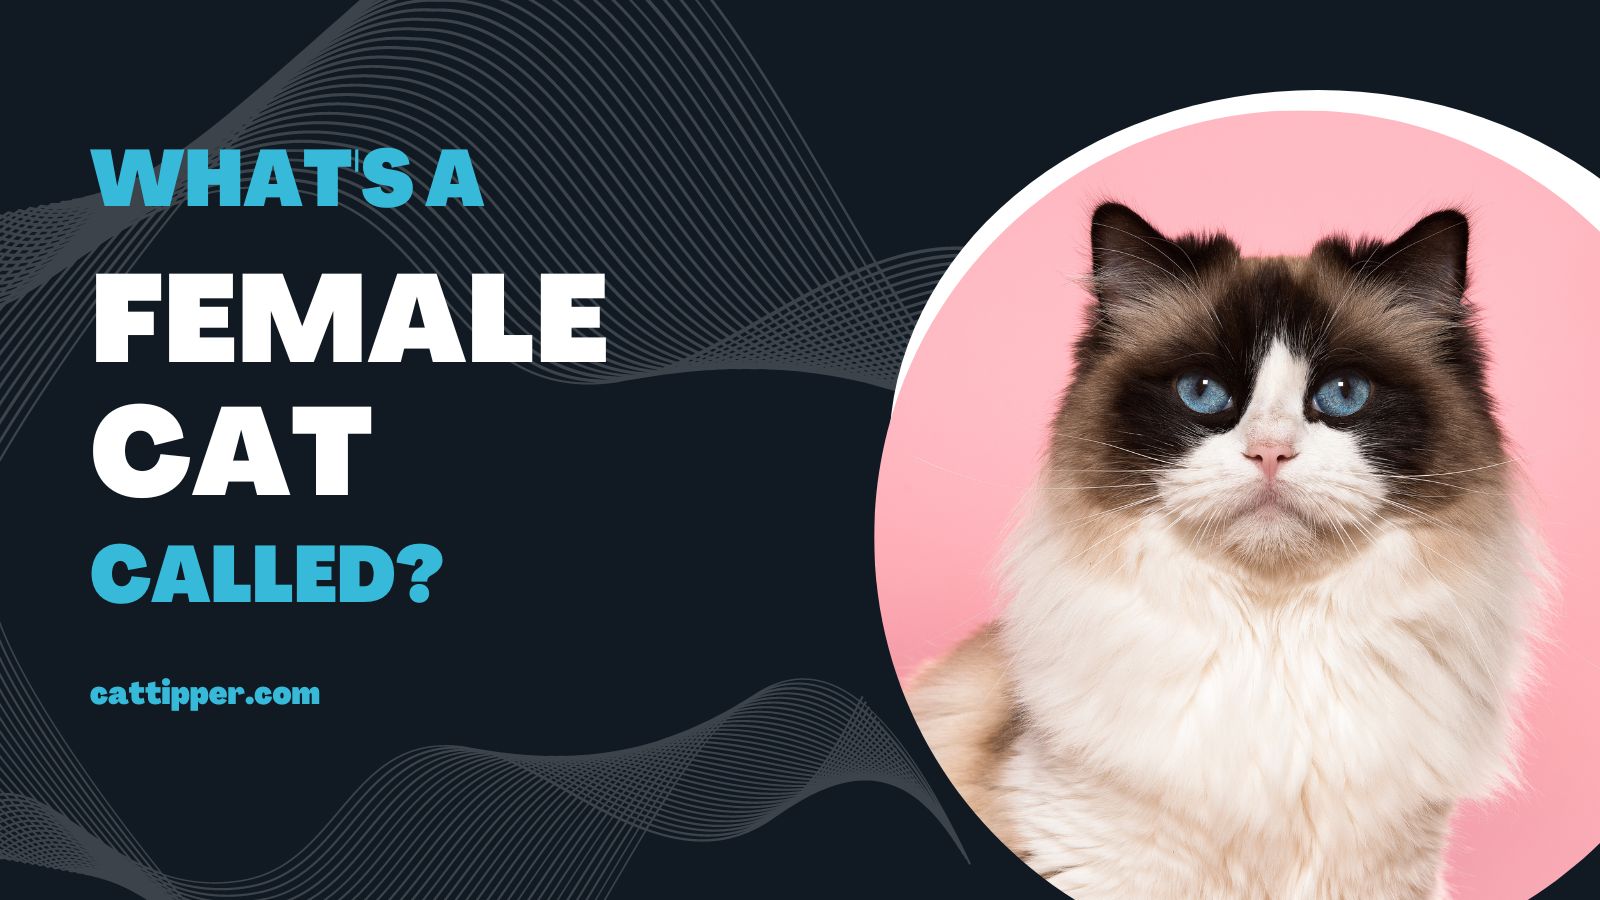 What is a female cat called?